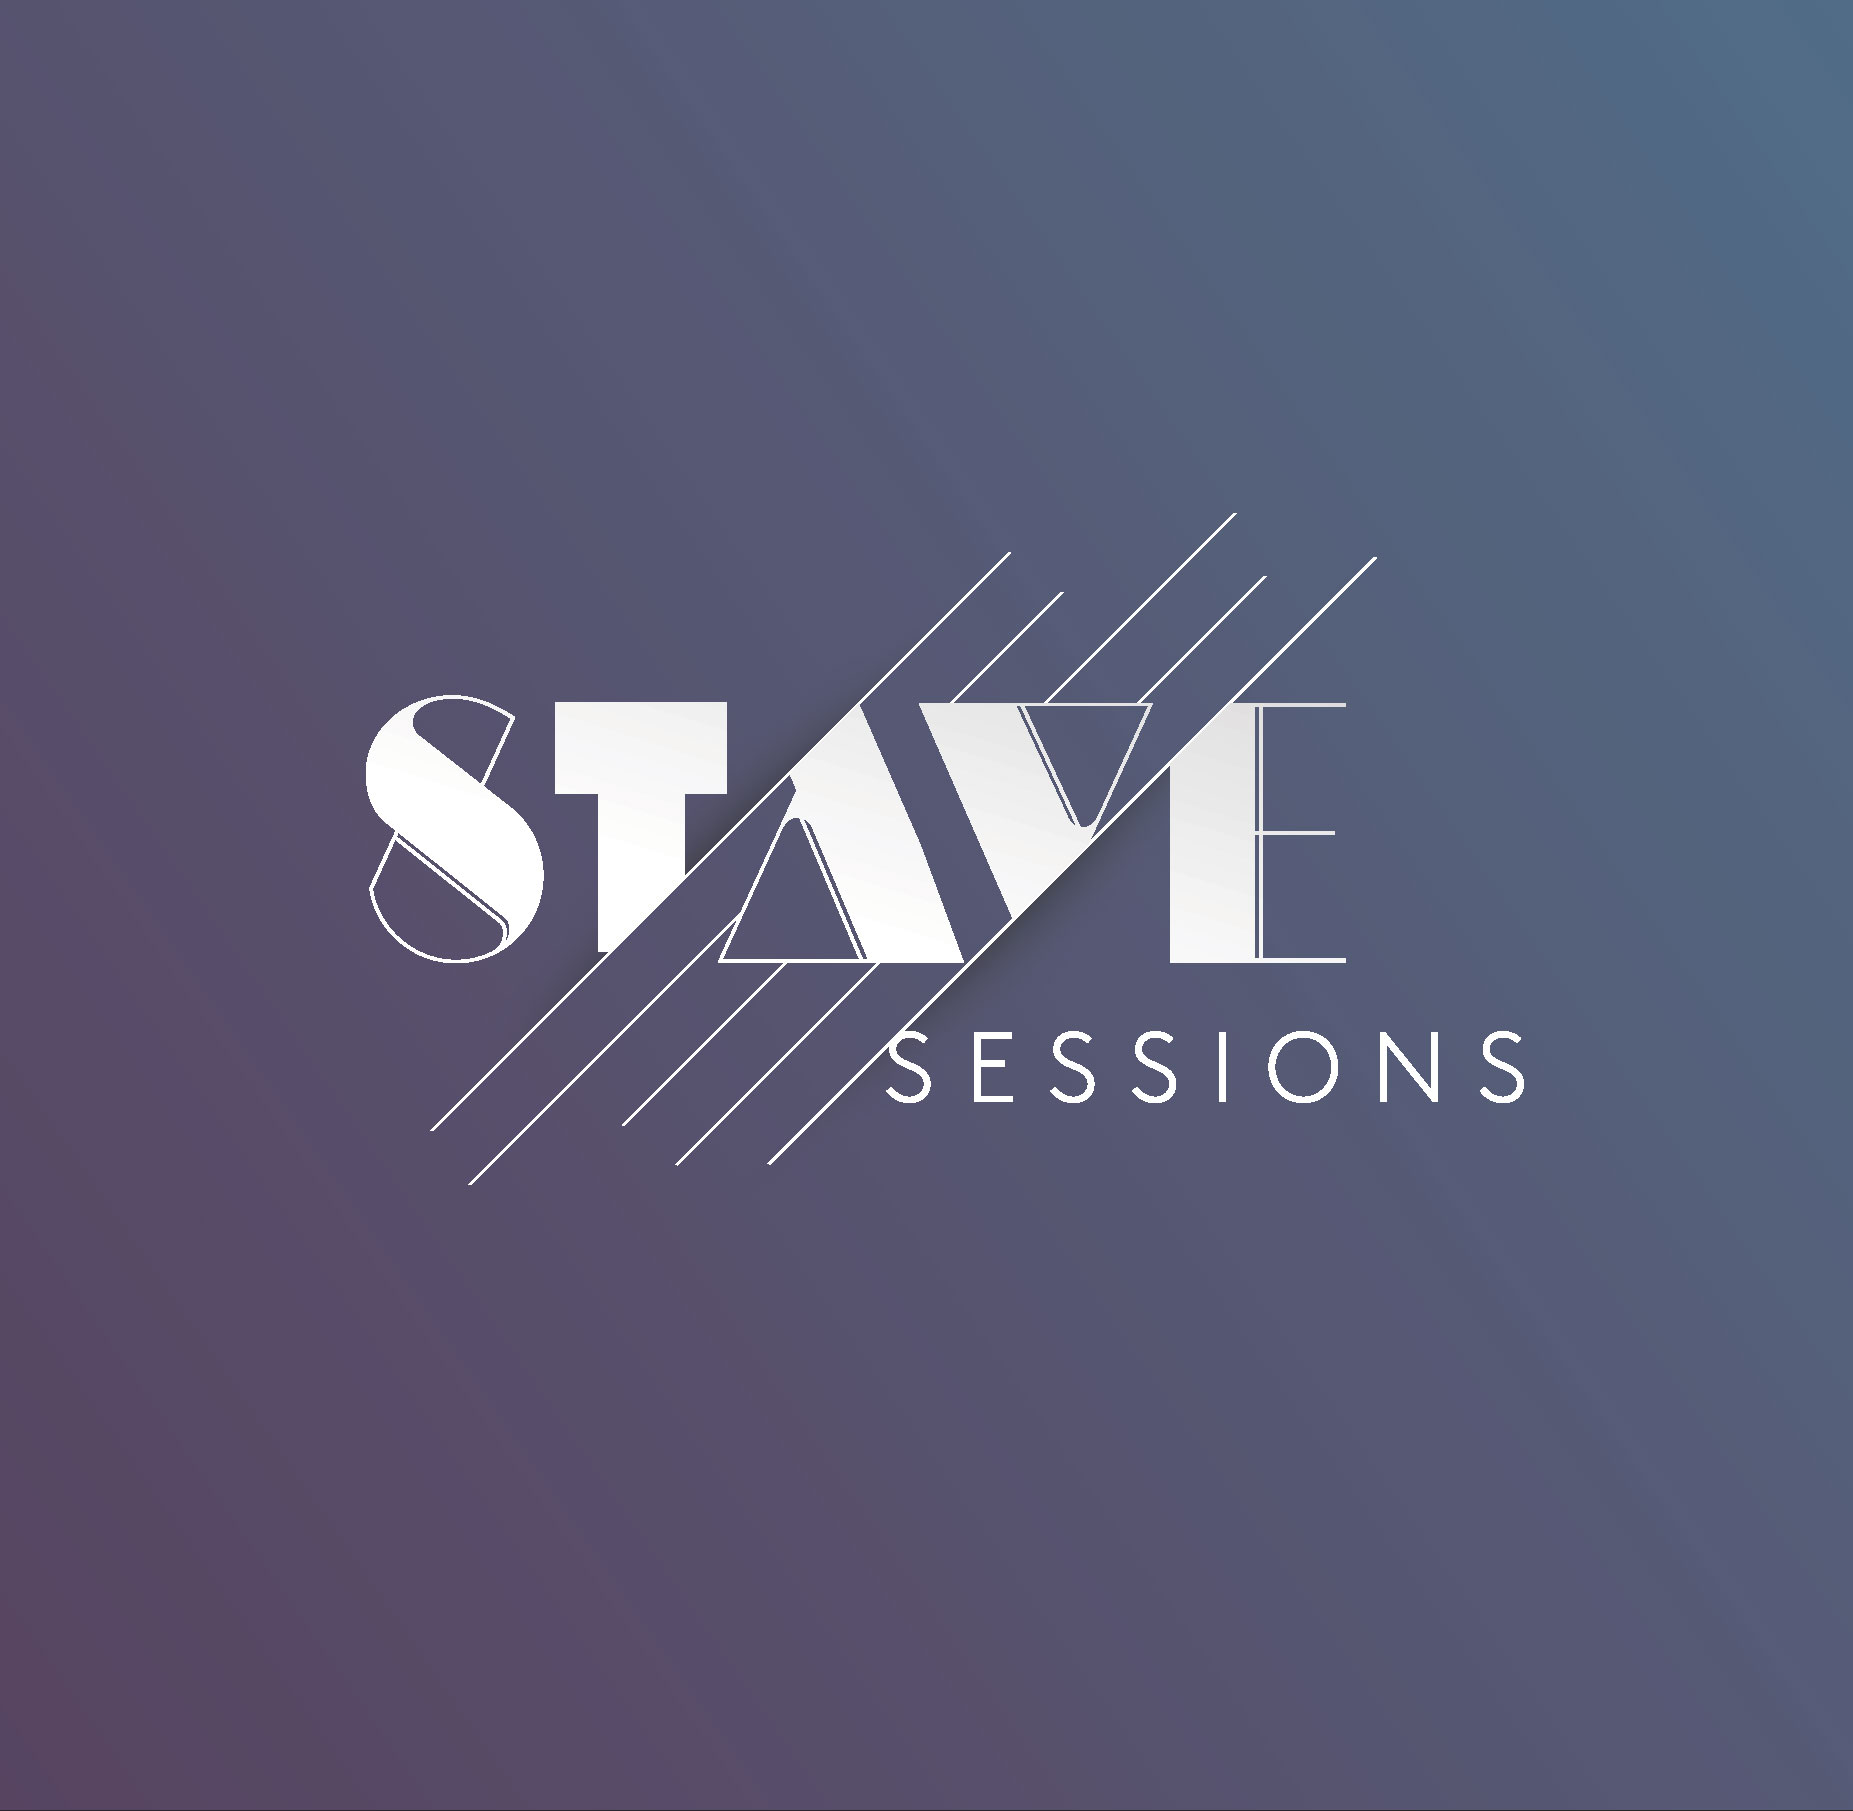 Stave Sessions Logo